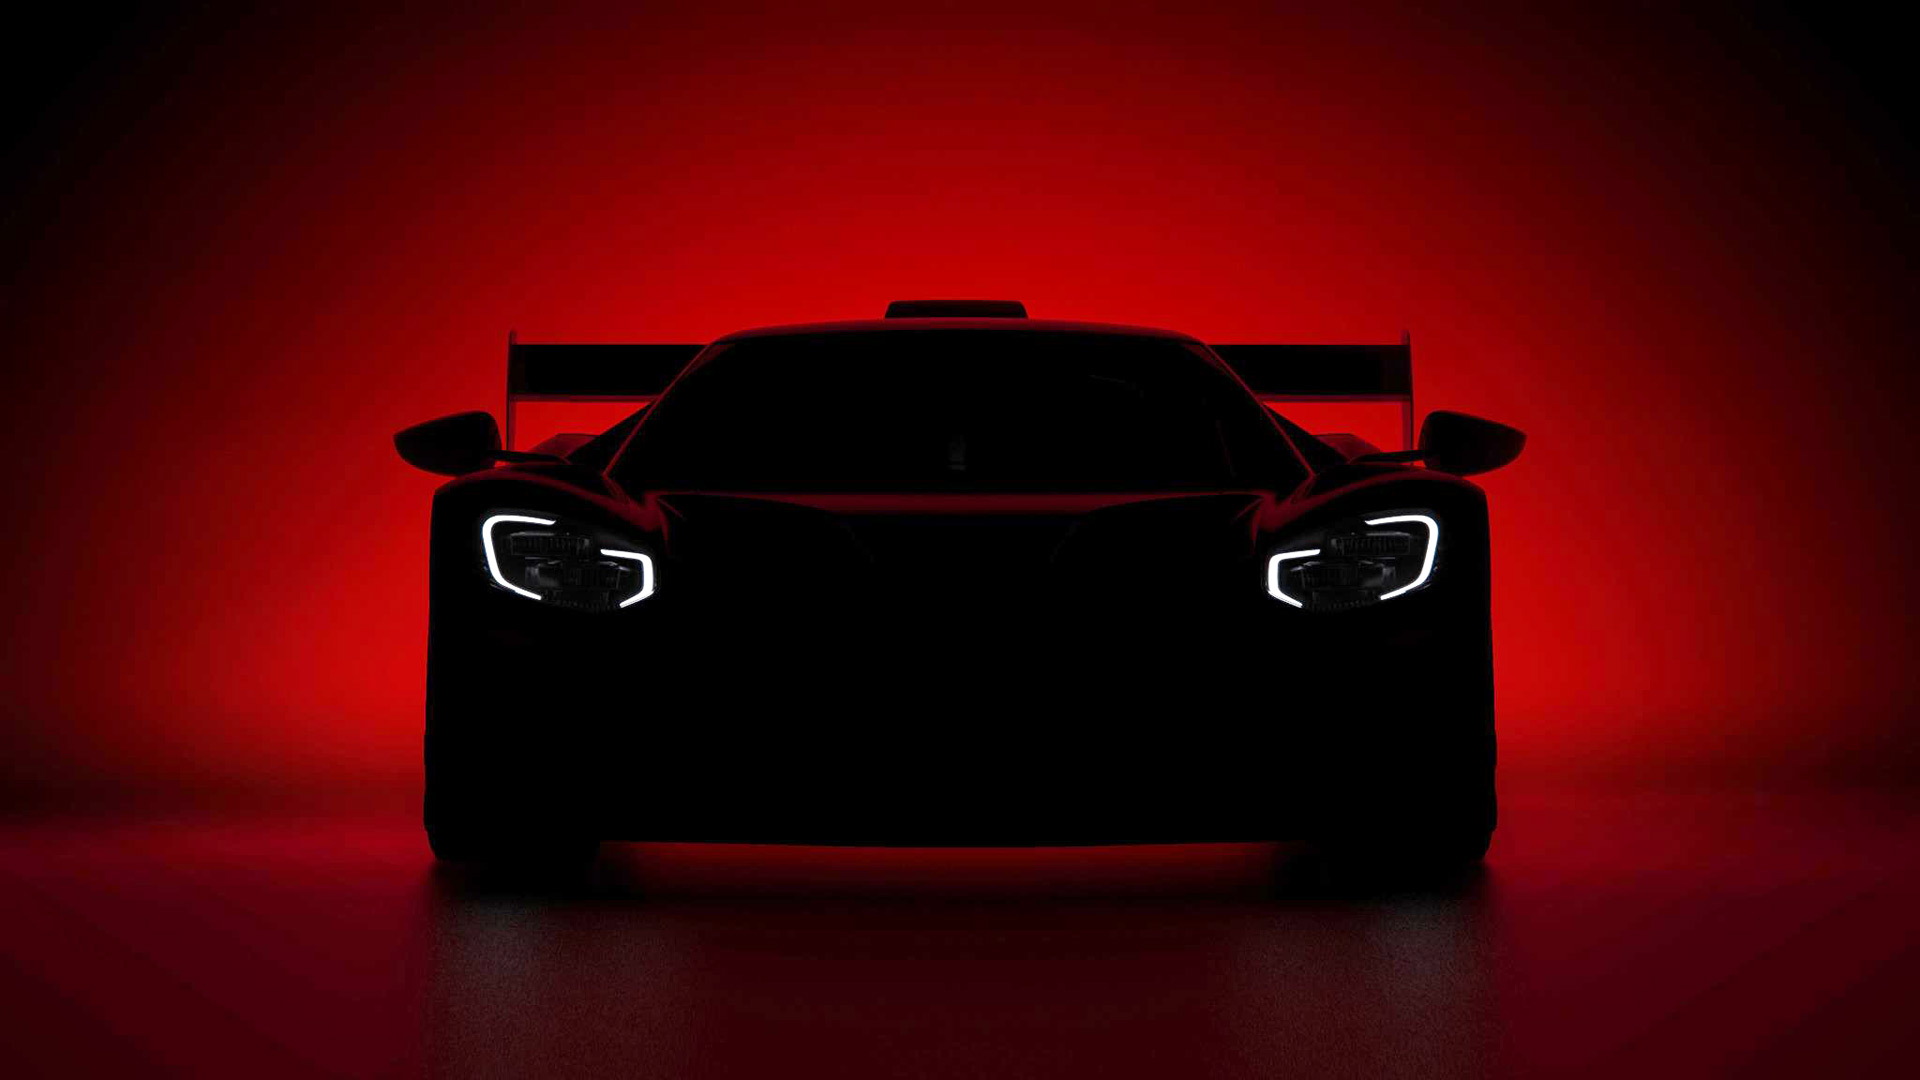 Teaser for mystery Ford GT debuting at 2019 Goodwood Festival of Speed